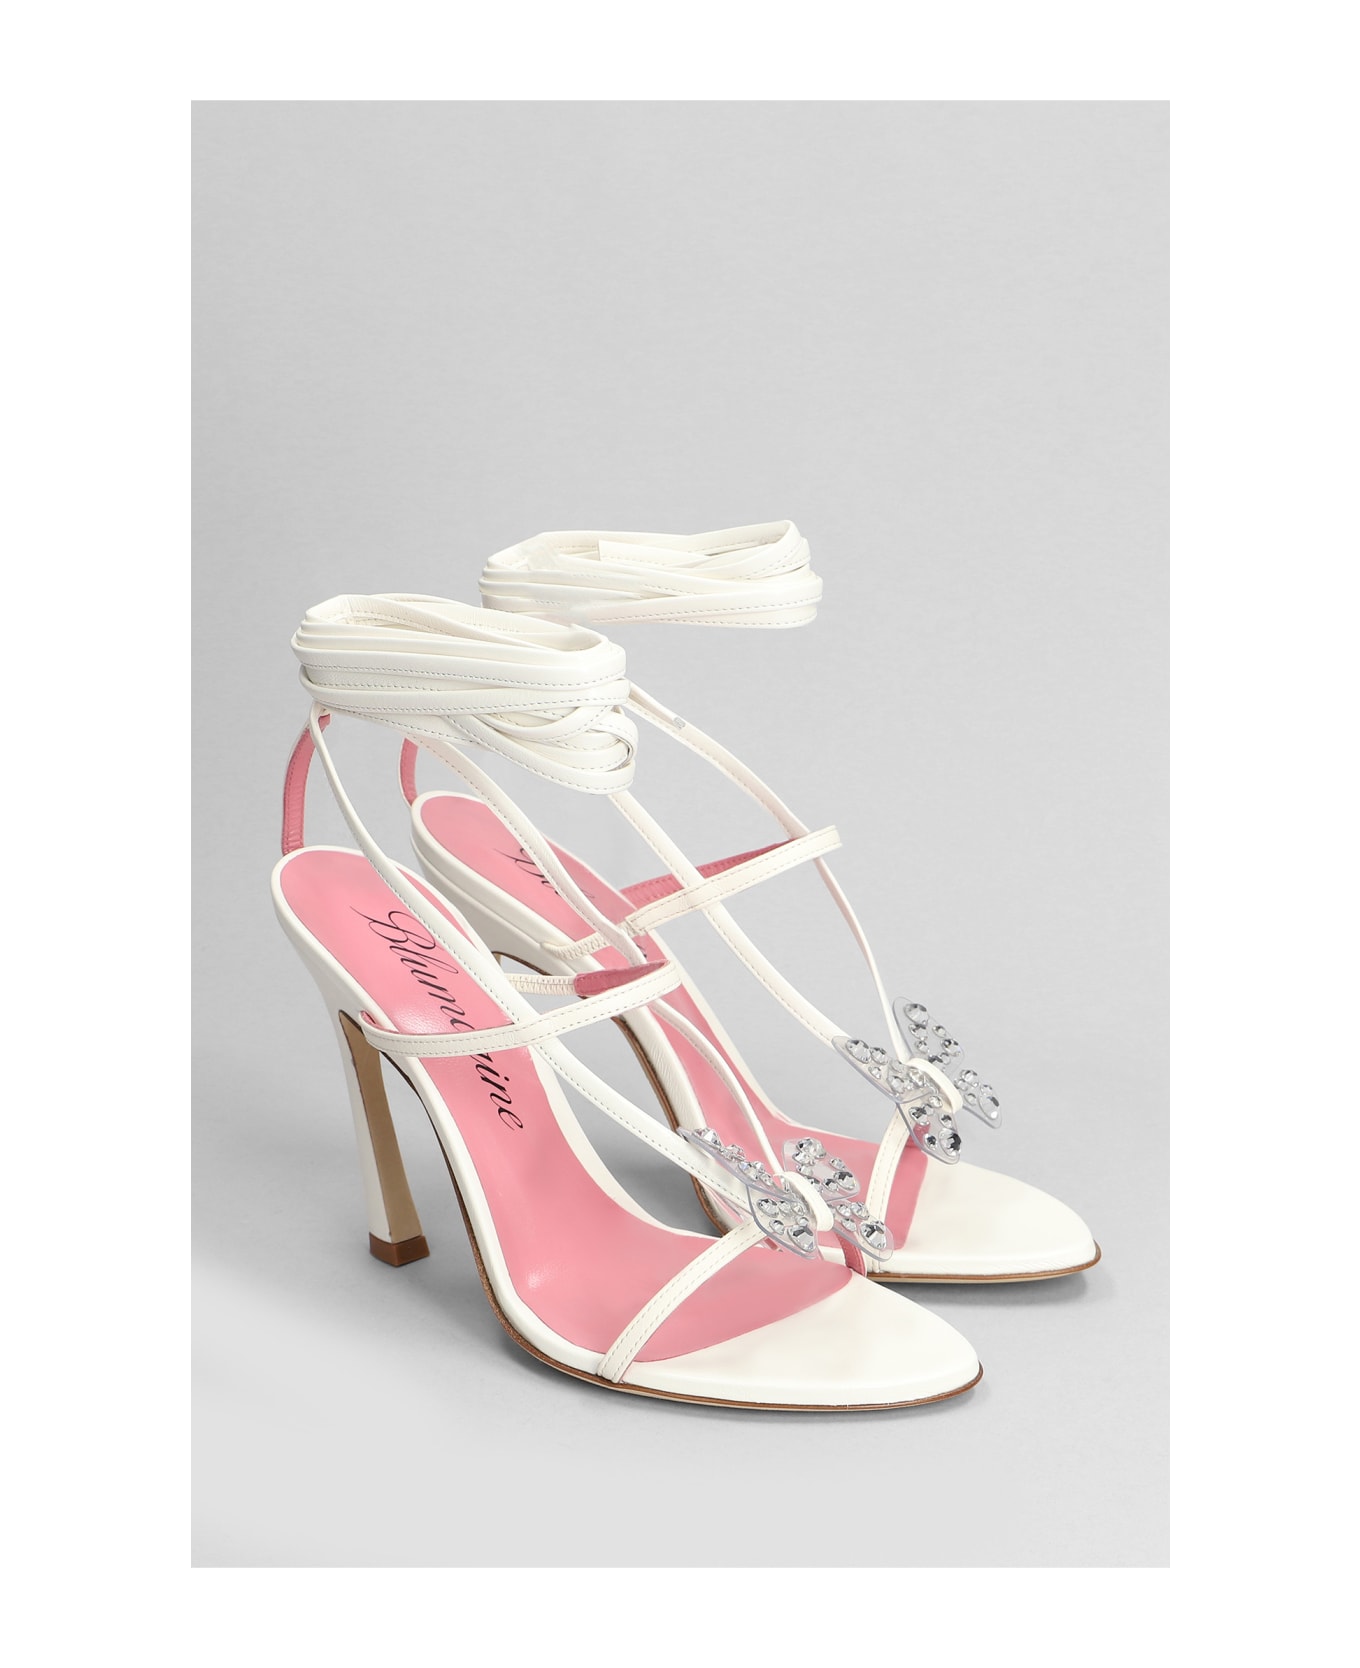 Blumarine Butterfly 111 Sandals In White Leather - white サンダル